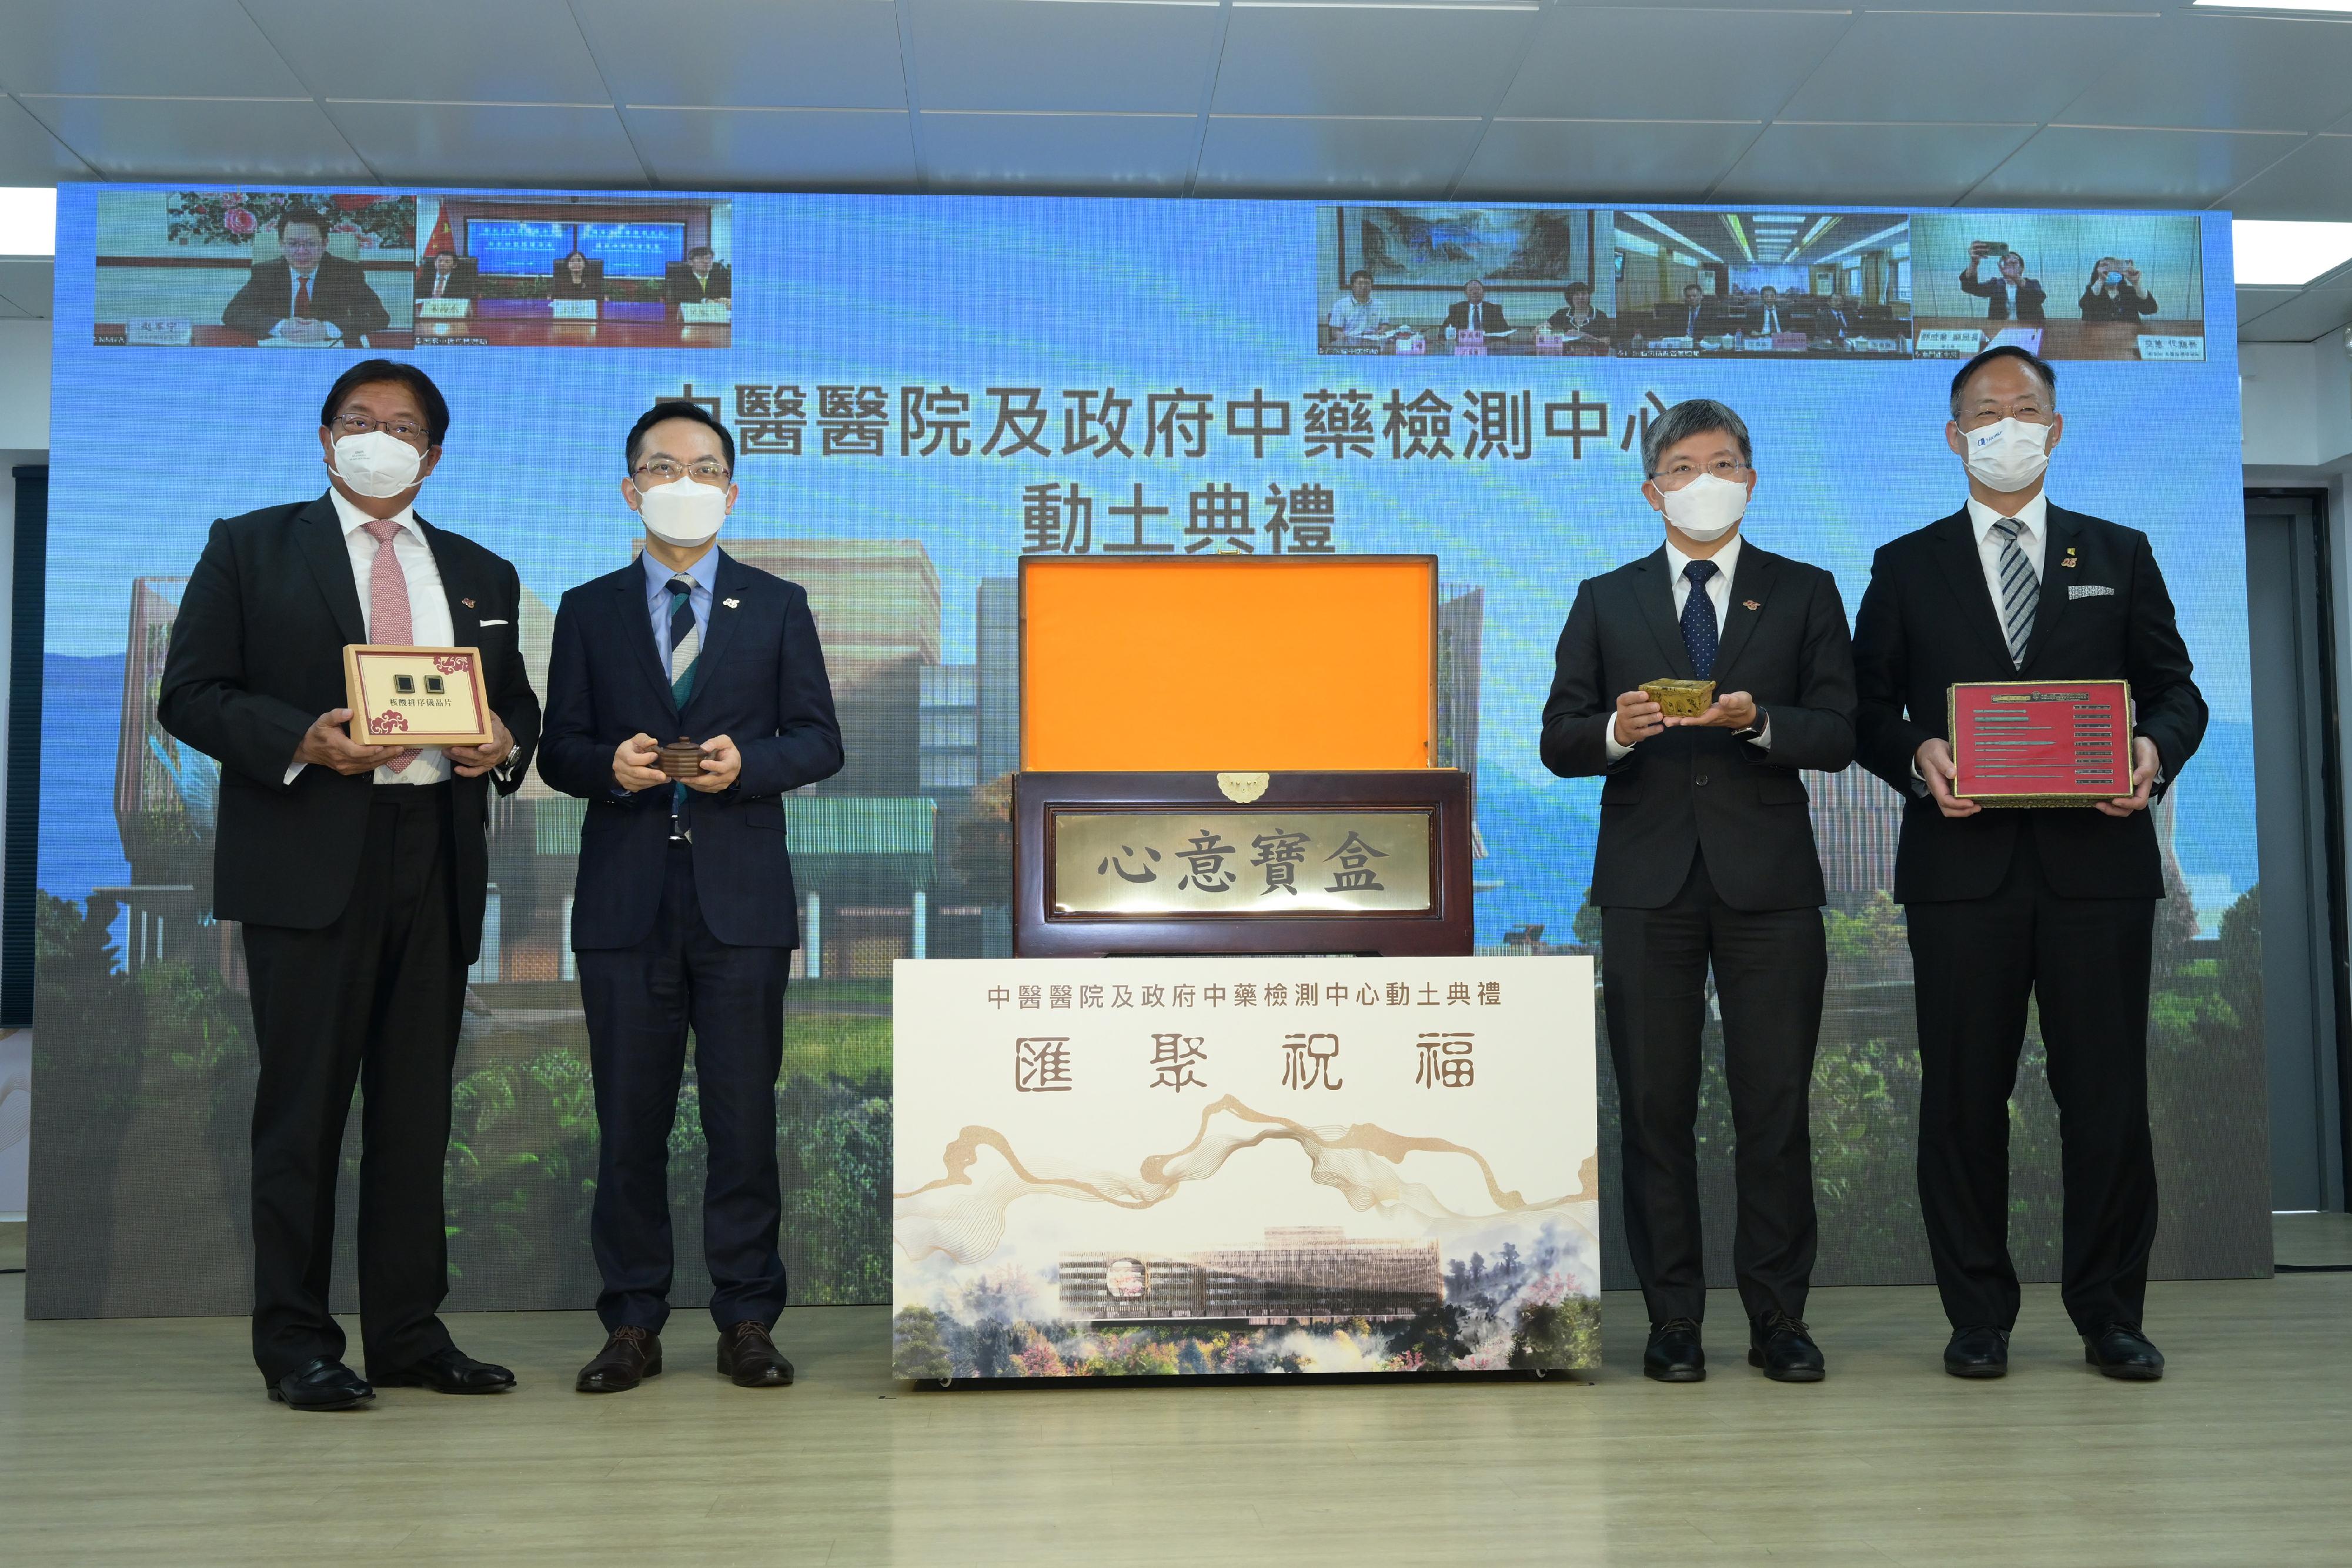 The Permanent Secretary for Food and Health (Health), Mr Thomas Chan (second right); the Director of Health, Dr Ronald Lam (second left); the President of Hong Kong Baptist University (HKBU), Professor Alexander Wai (first right); and the Chairman of the Board of Directors of the HKBU Chinese Medicine Hospital Company Limited, Mr Albert Wong (first left), place symbolic items of Chinese medicine in a treasure chest of blessings at the Groundbreaking Ceremony of the Chinese Medicine Hospital and the Government Chinese Medicines Testing Institute today (June 2).